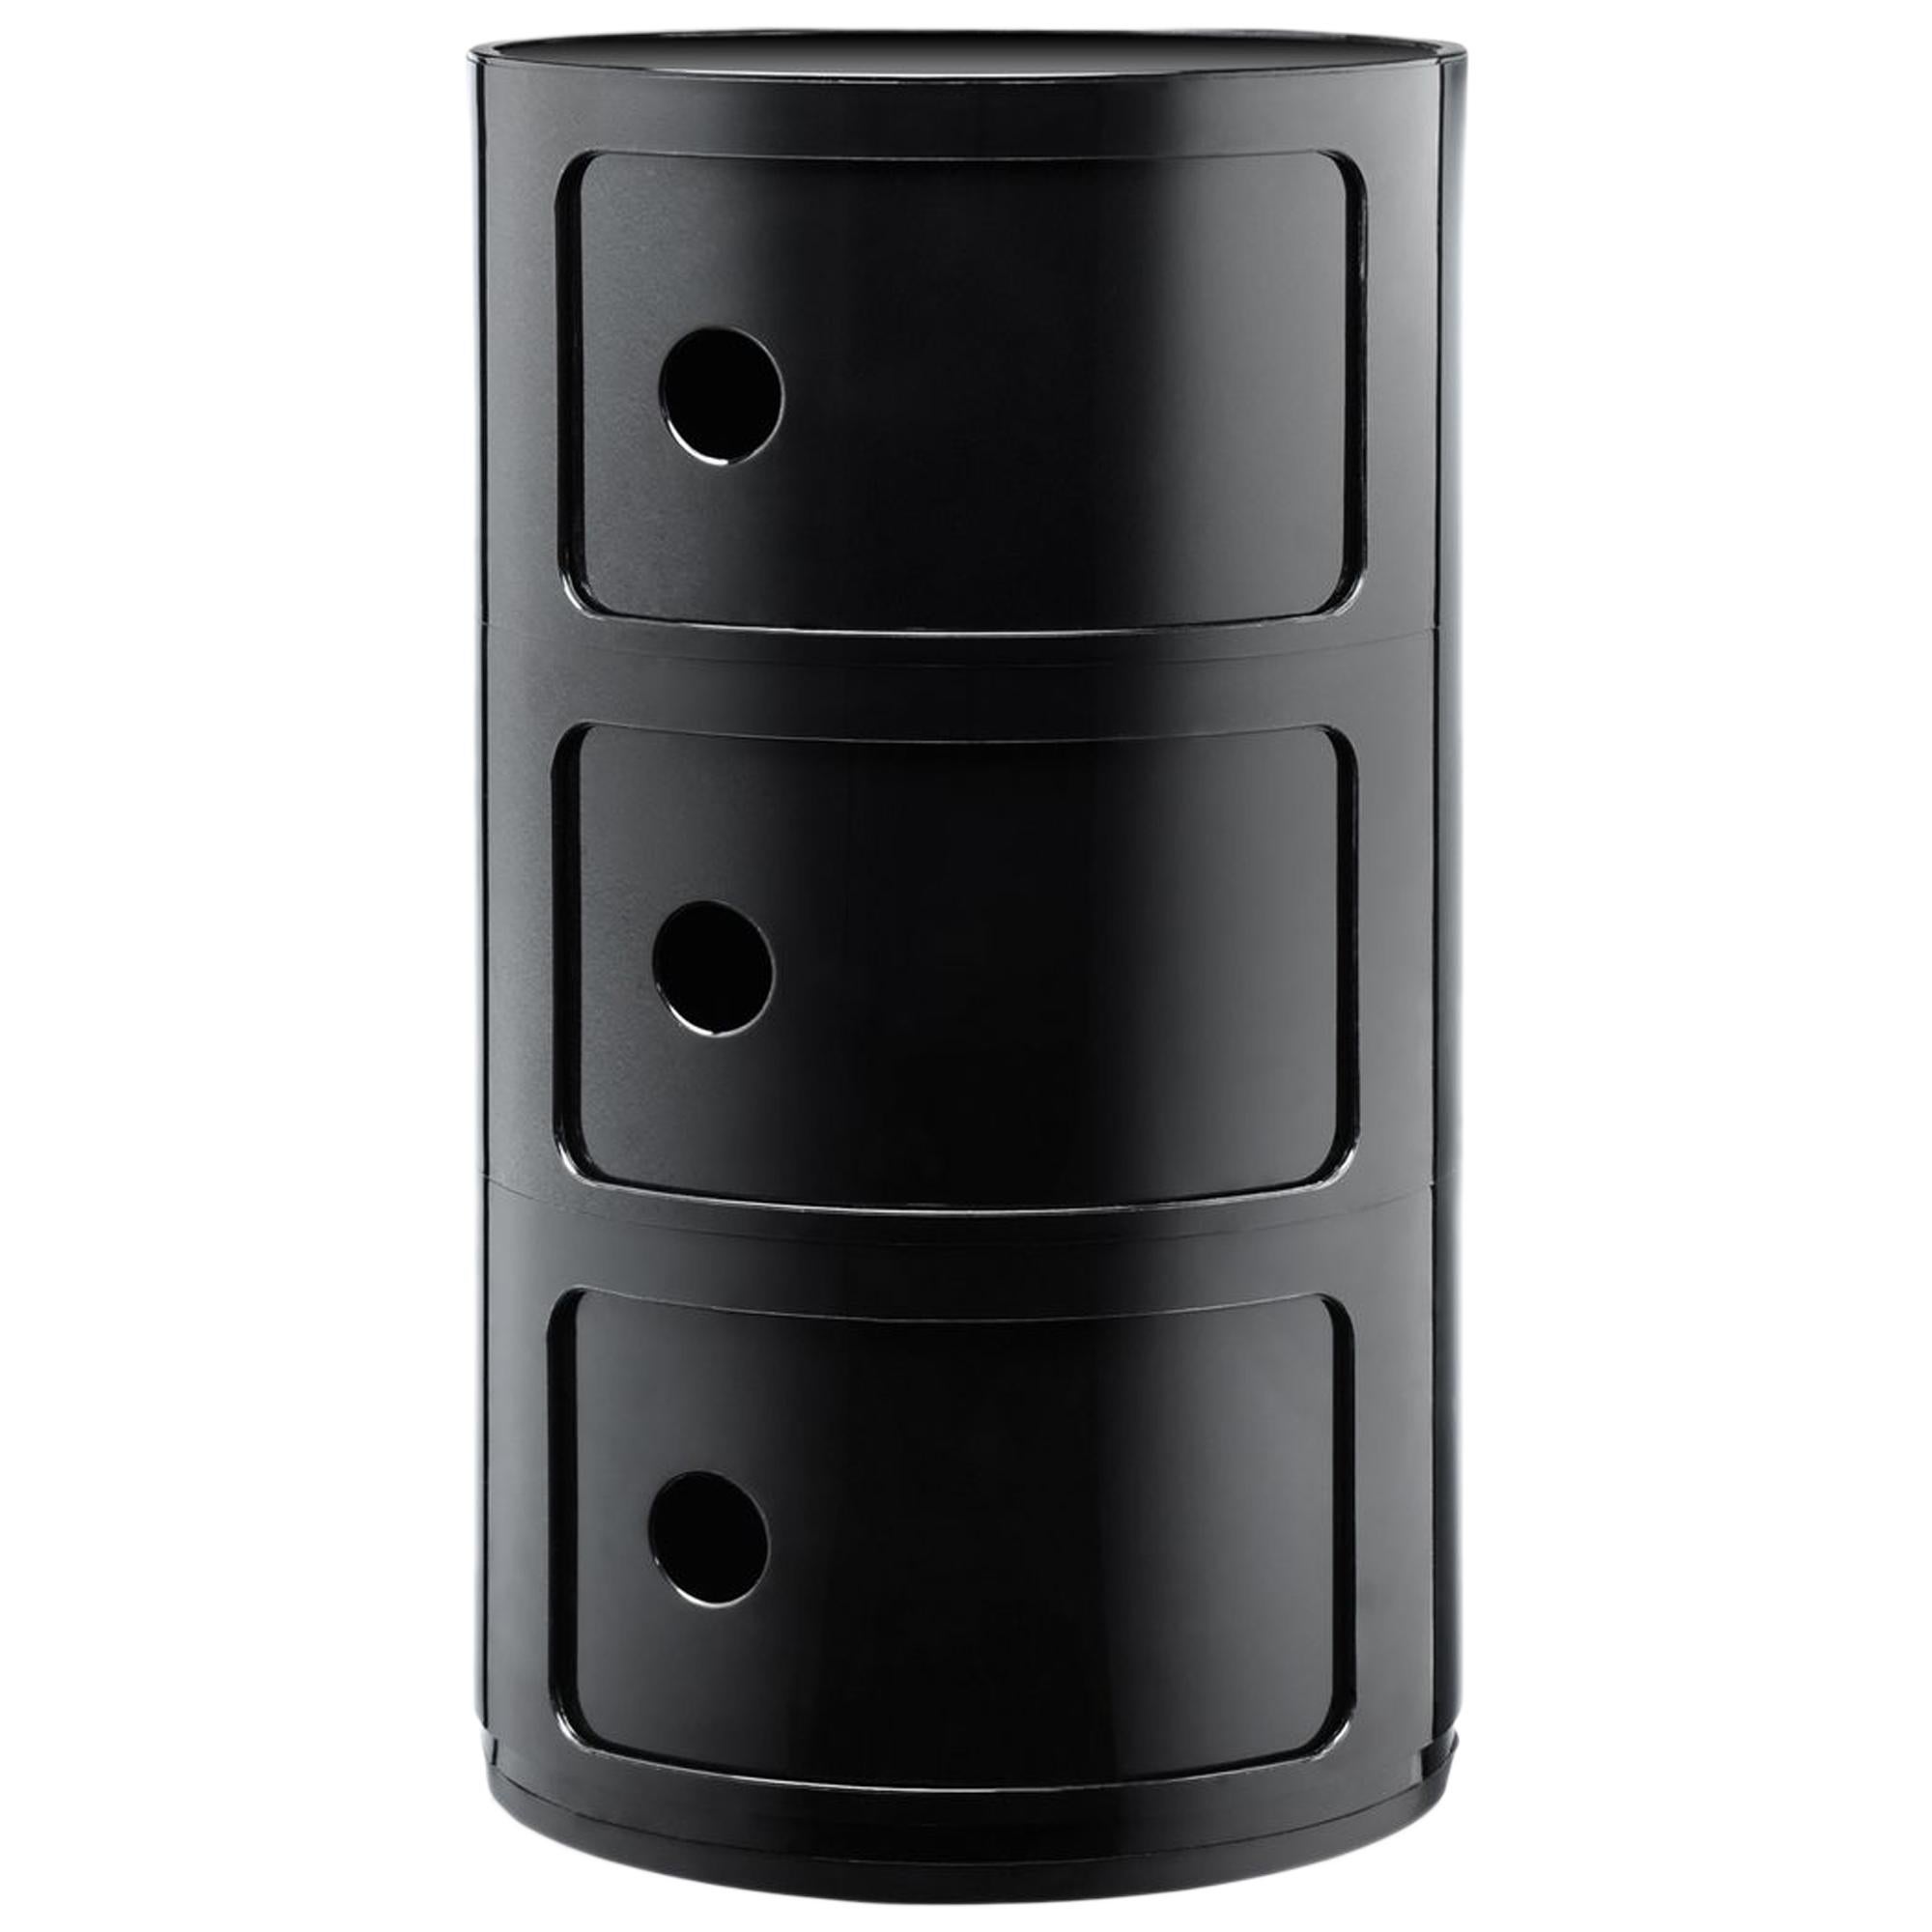 Kartell Componibili 3-Tier Drawer in Black by Anna Castelli Ferrieri For Sale